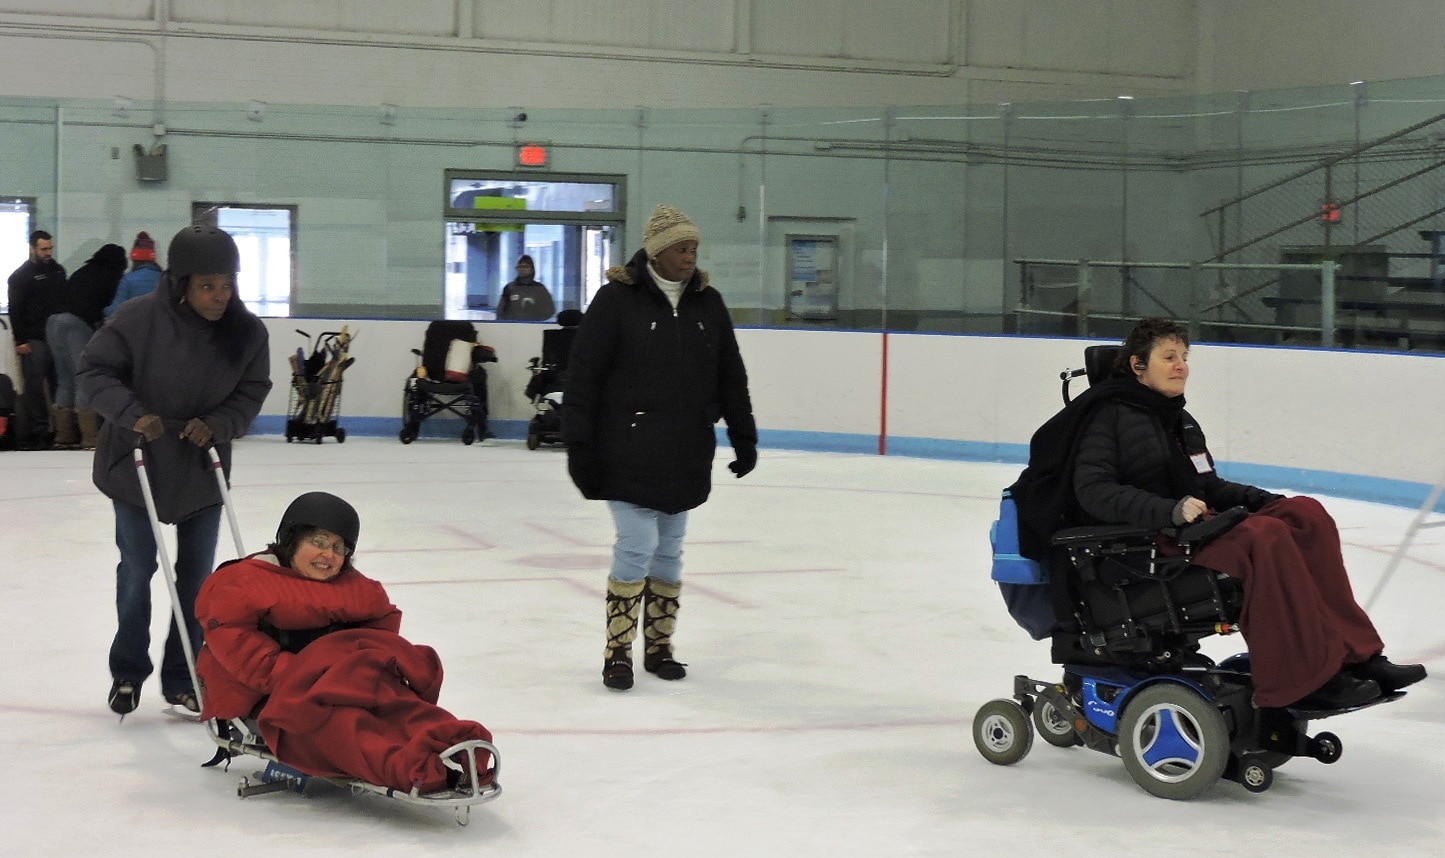 Two seated skaters and two standing skaters on the ice. The skaters are wearing jeans, winter coats, hats, and gloves. The seated skaters have blankets over their legs.